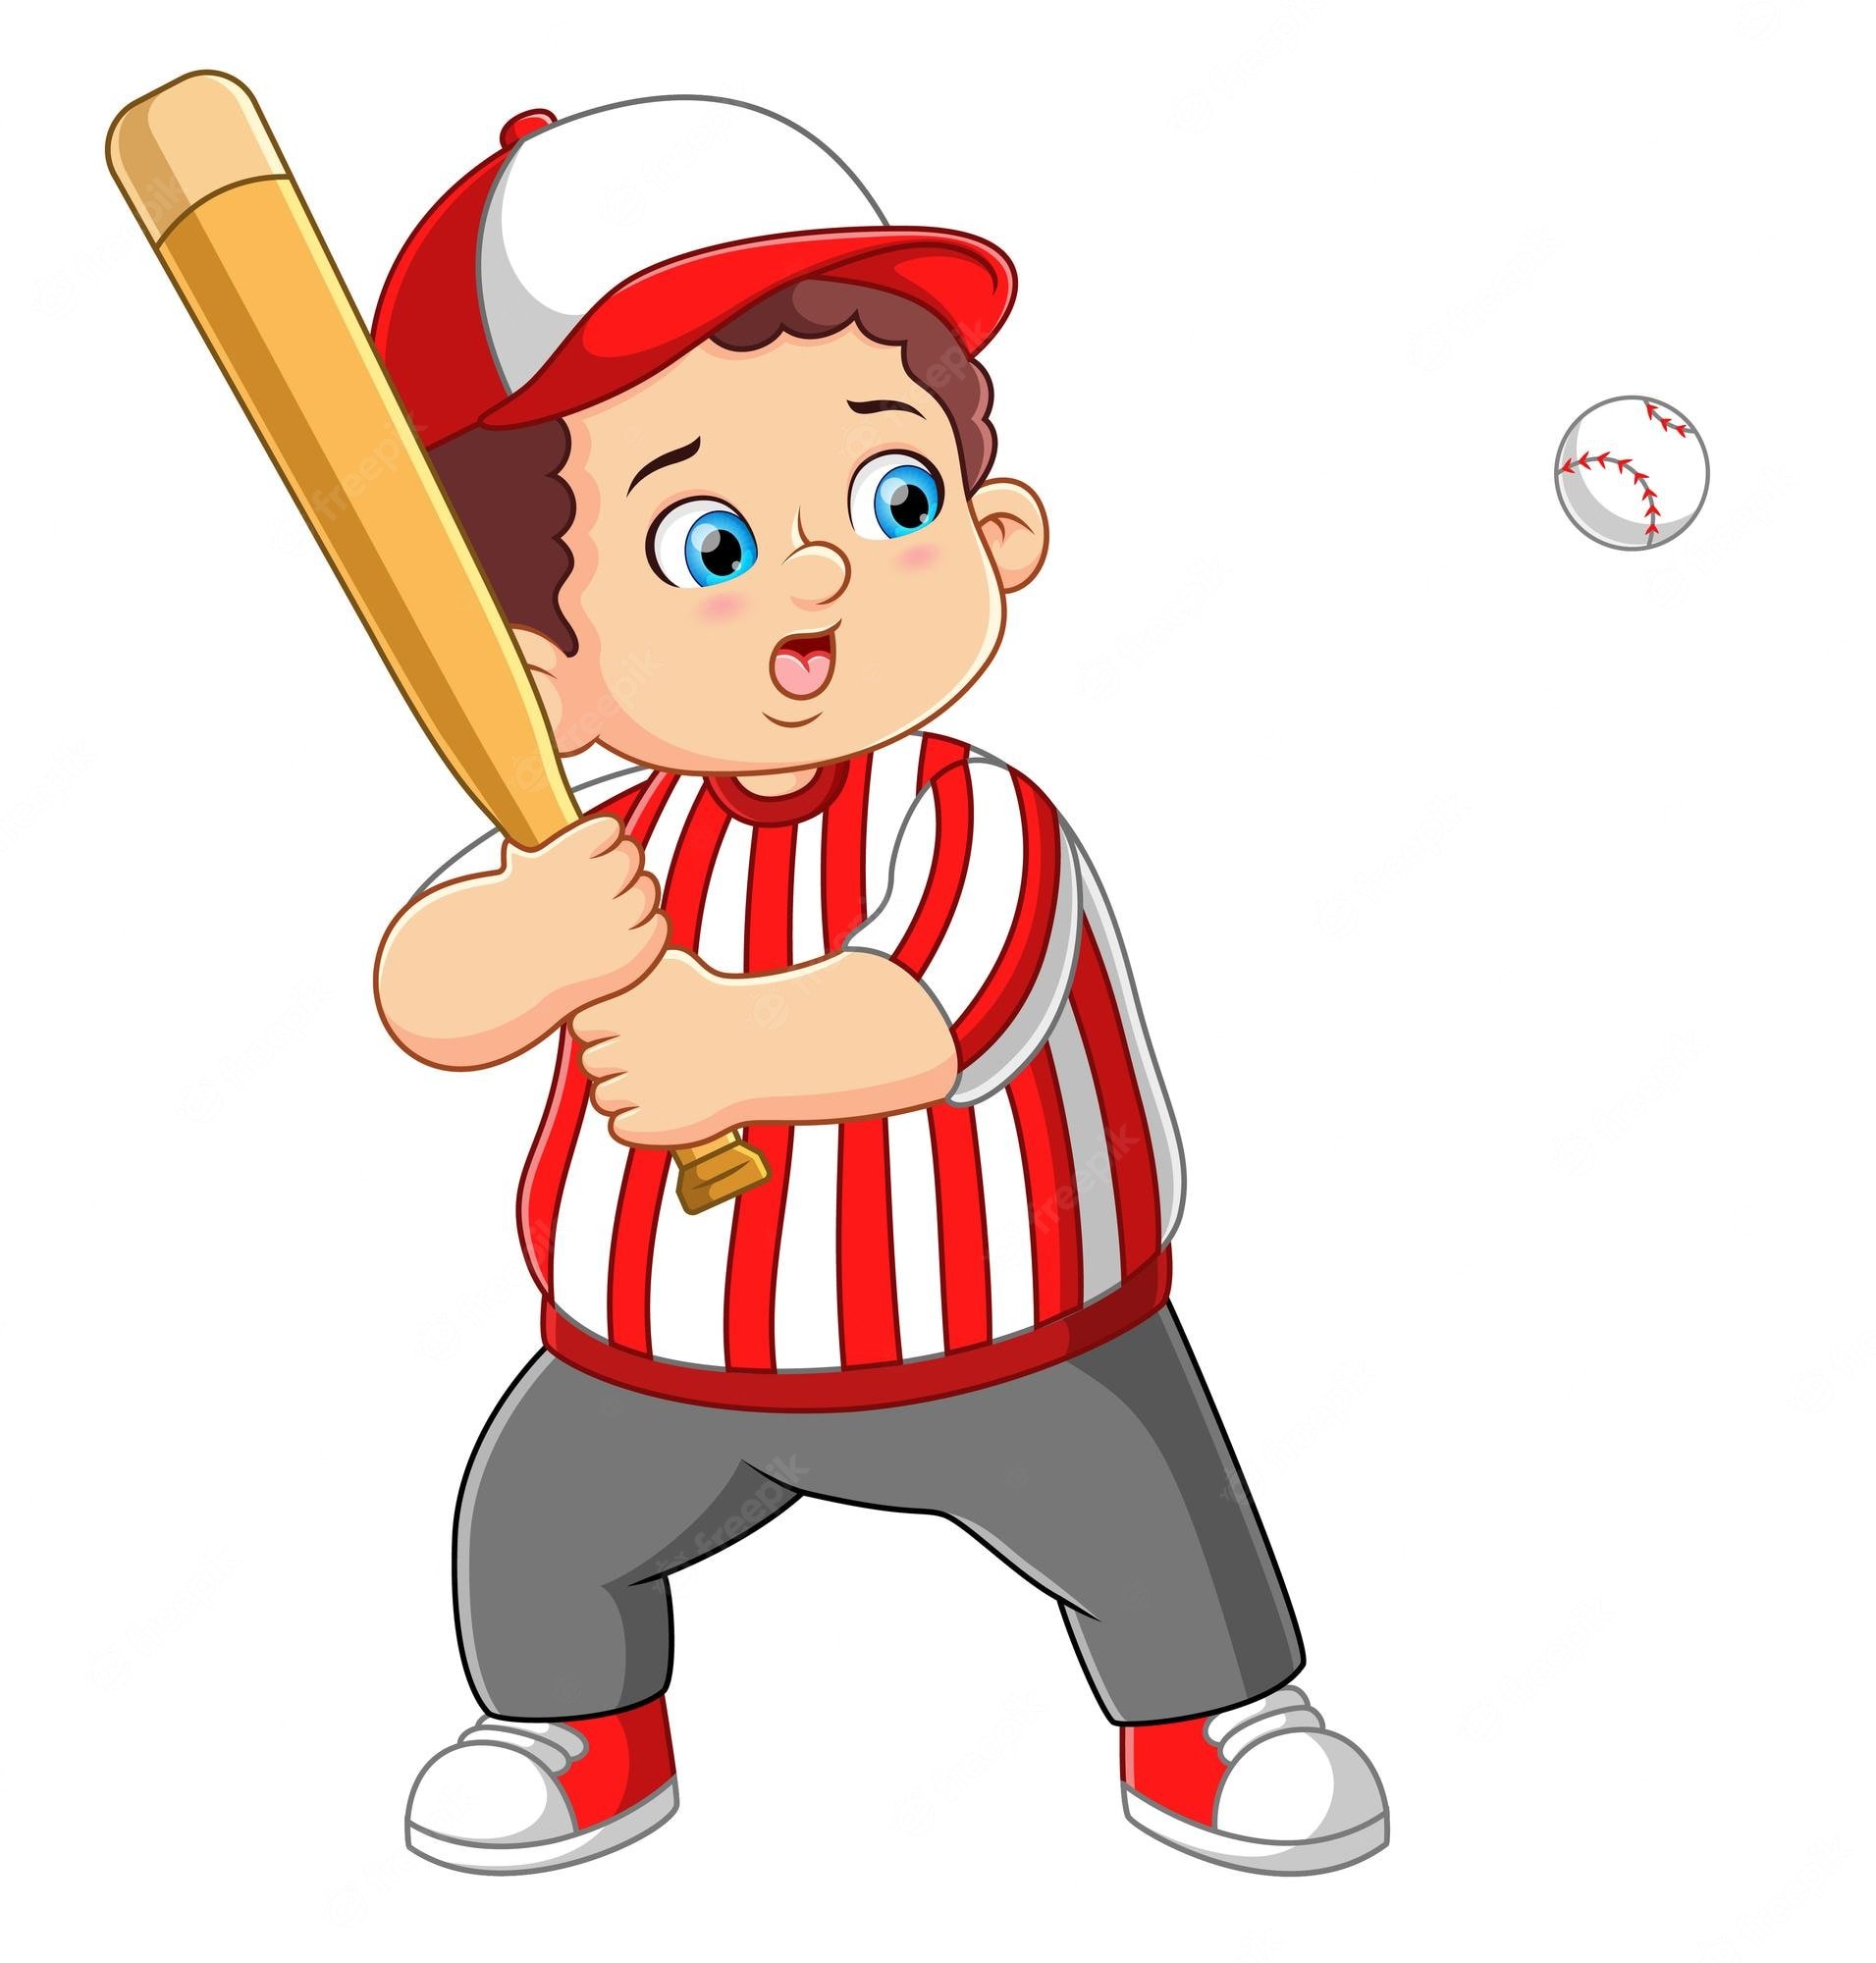 Premium Vector. Young boy hitting the ball in a youth baseball game